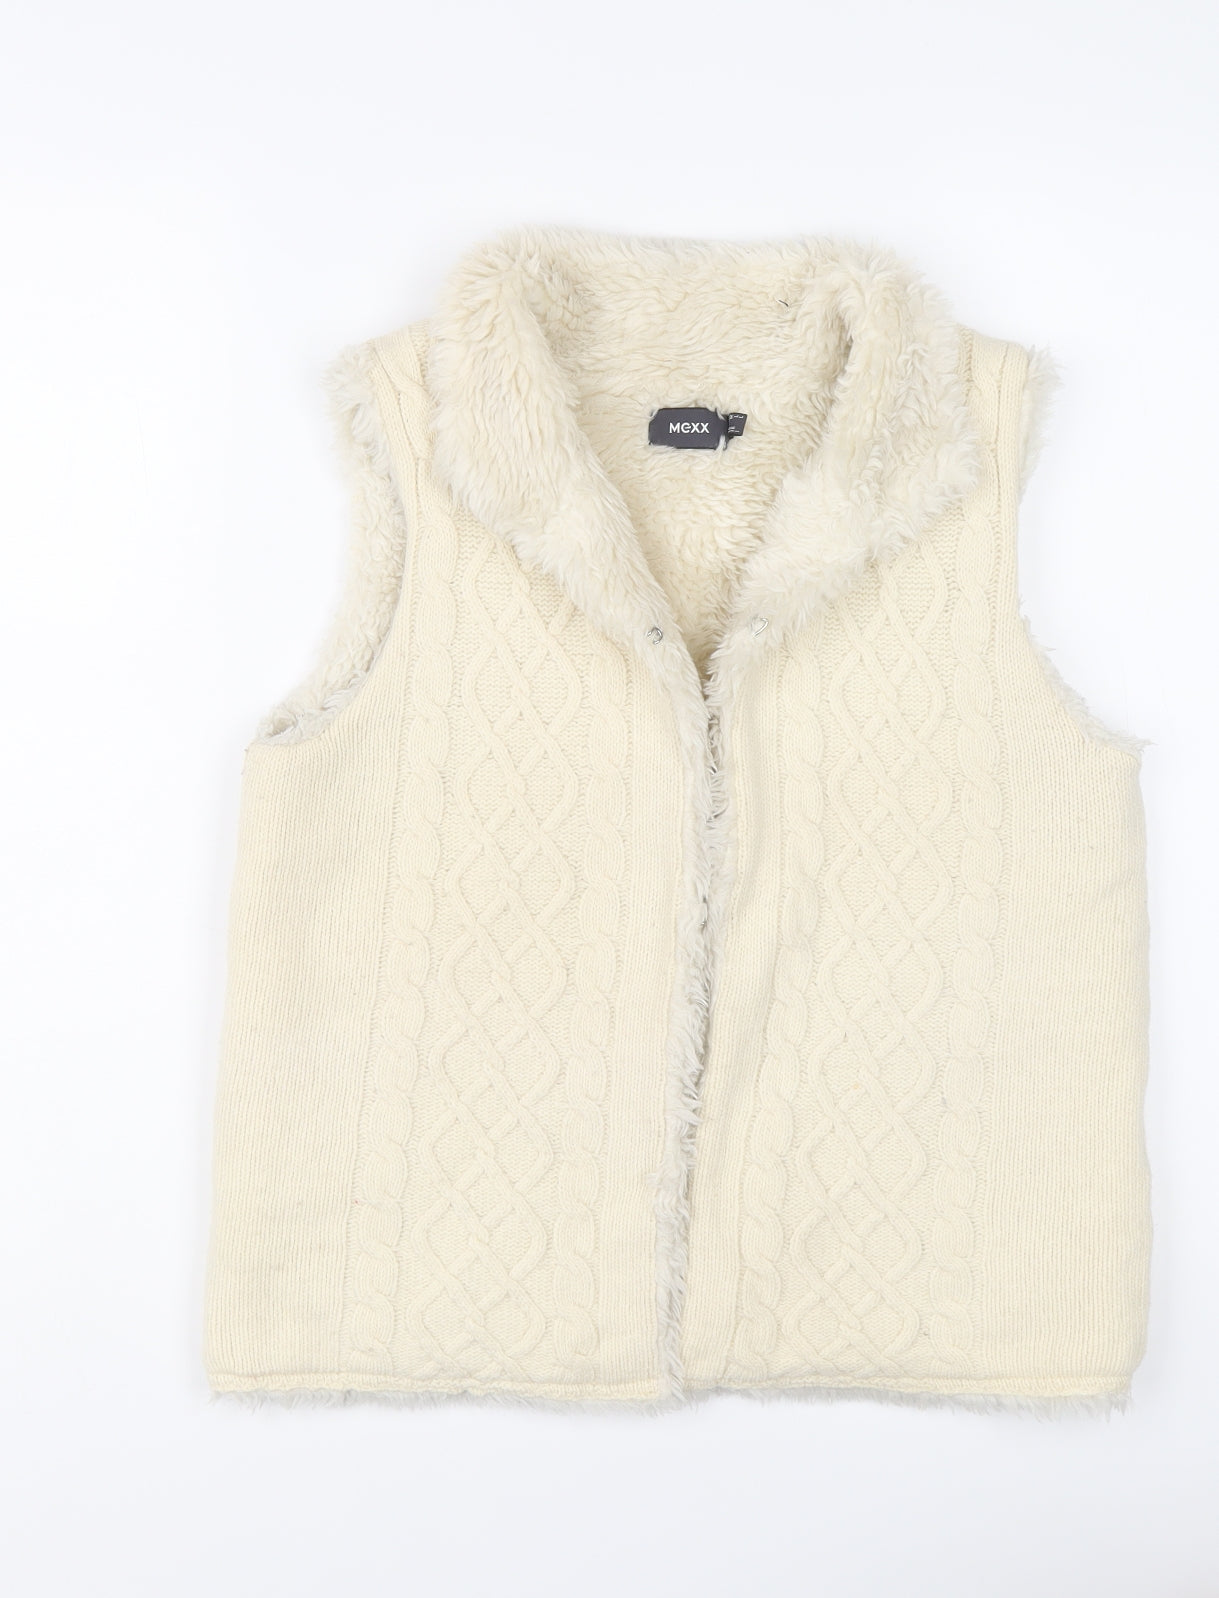 Mexx Womens Ivory Wool Gilet Coatigan Size M Hook & Eye - Cable Knit